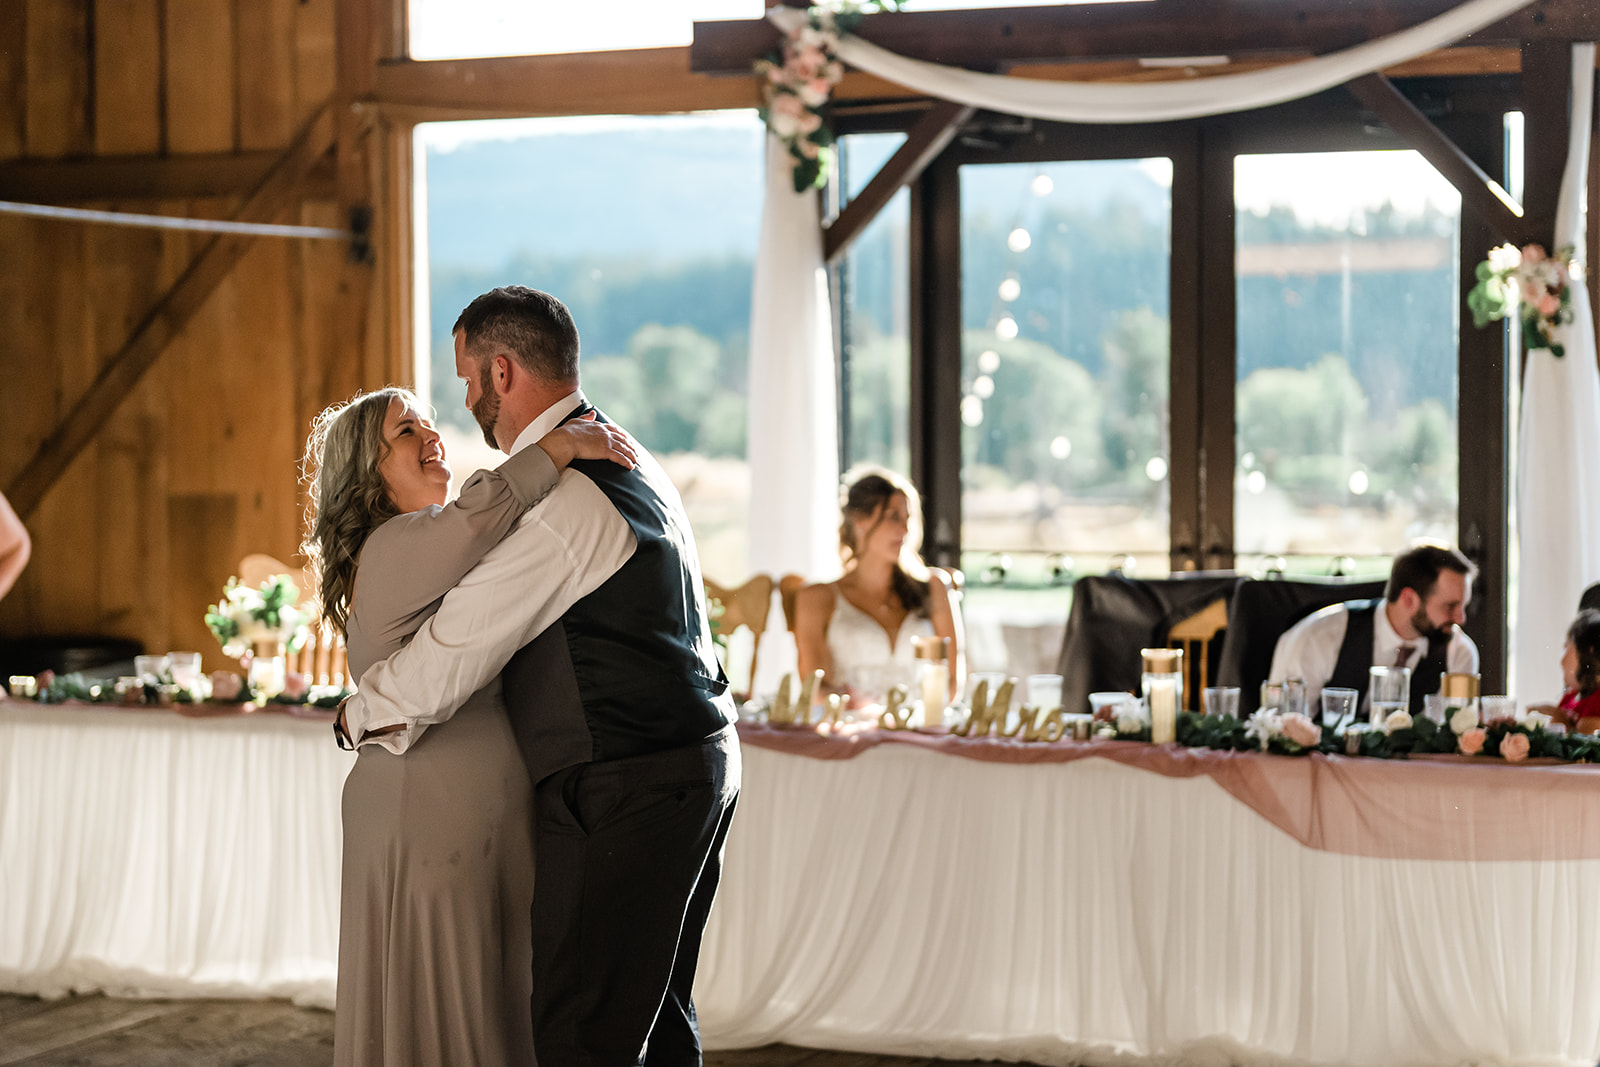 Groom and Mother dancing at a Cattle Barn Wedding